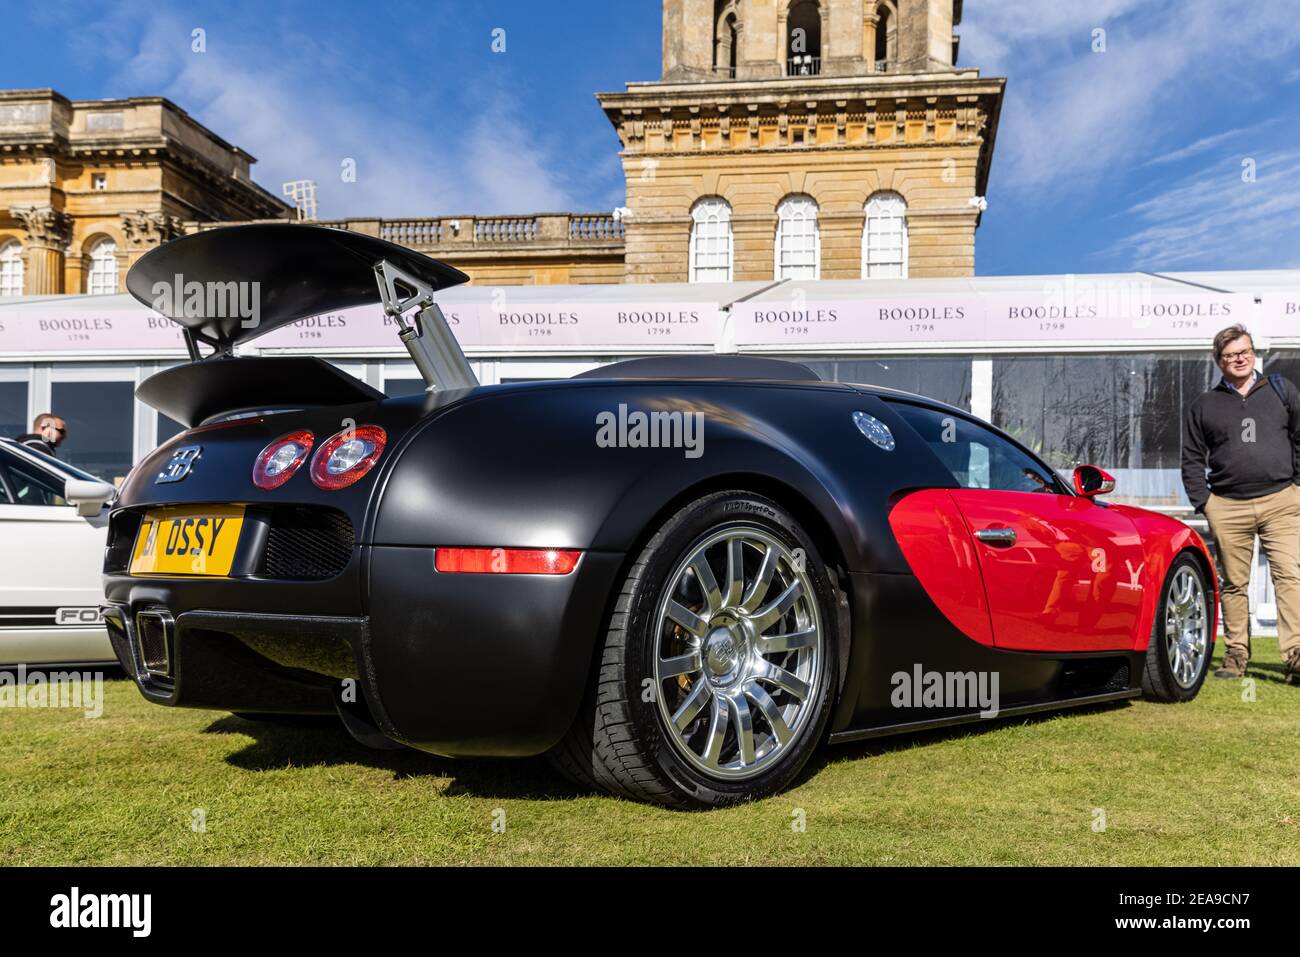 Bugatti Veyron on display at the Concours d Elégance held at Blenheim Palace on the 26 September 2020 Stock Photo